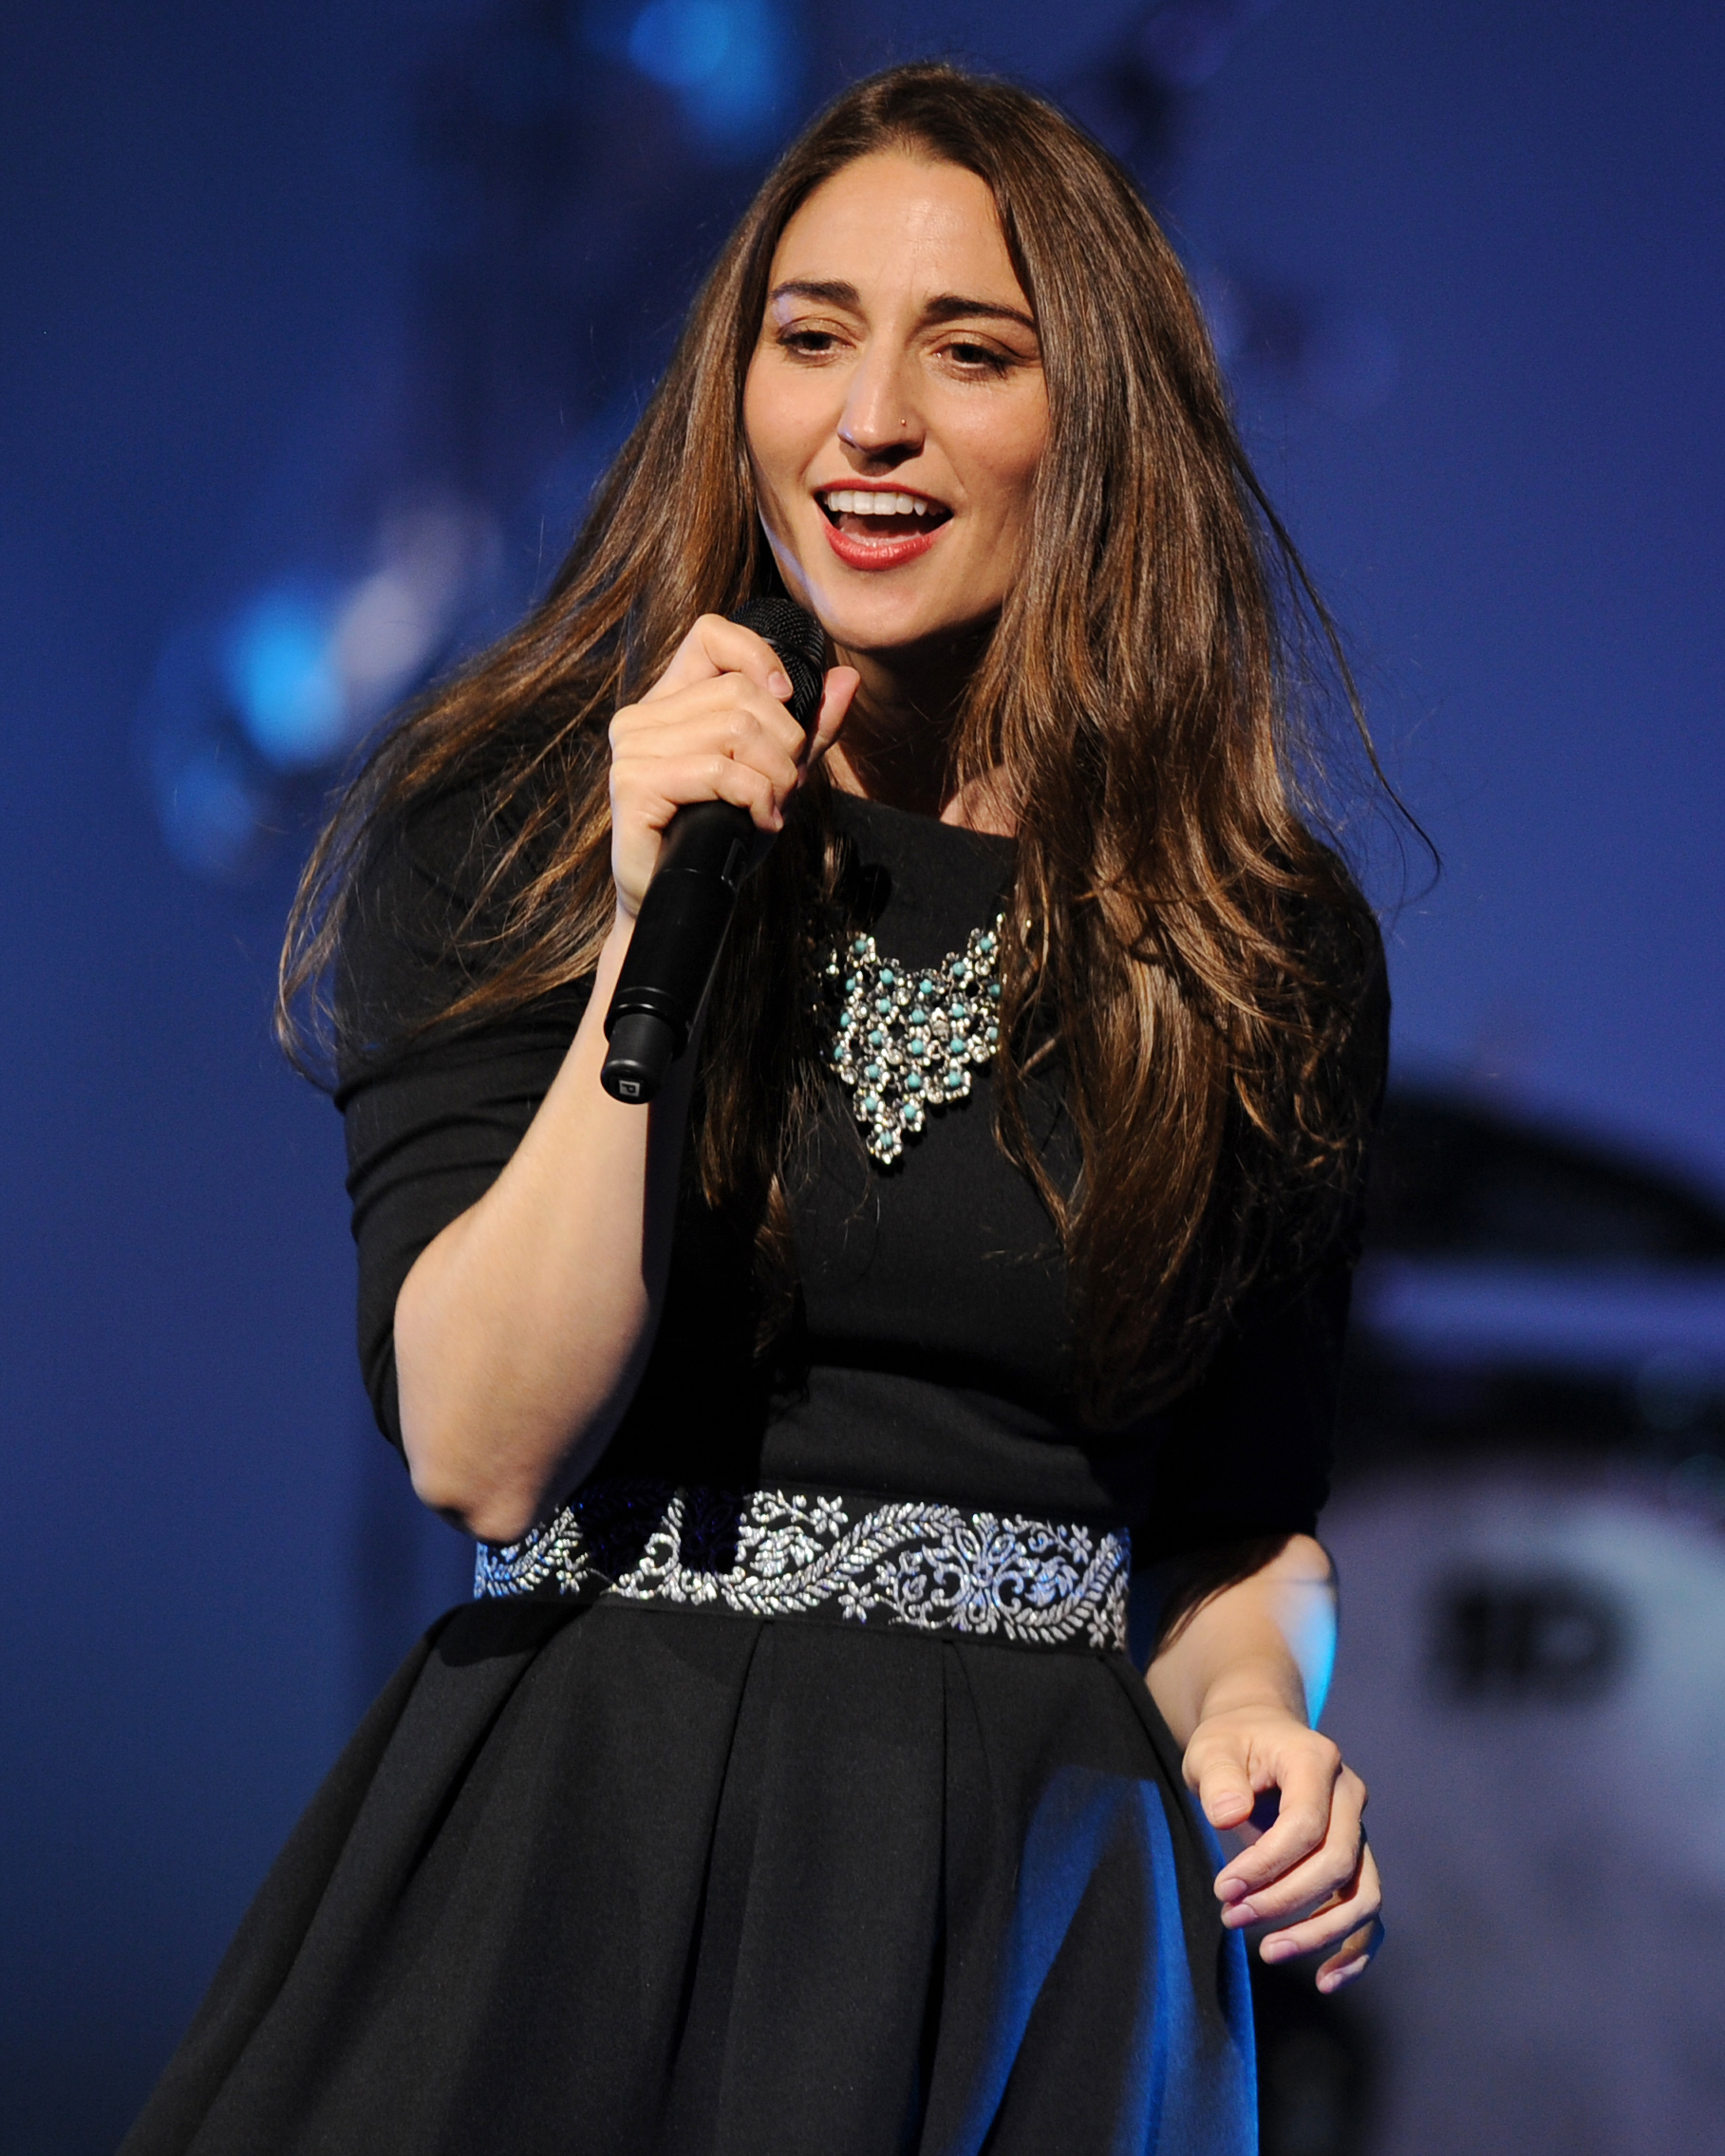 Sara Bareilles performs during the Little Black Dress Tour 2014 at the Seminole Casinos Hard Rock Live on July 25, 2014 in Hollywood, Florida. (Jeff Daly—Invision/AP)